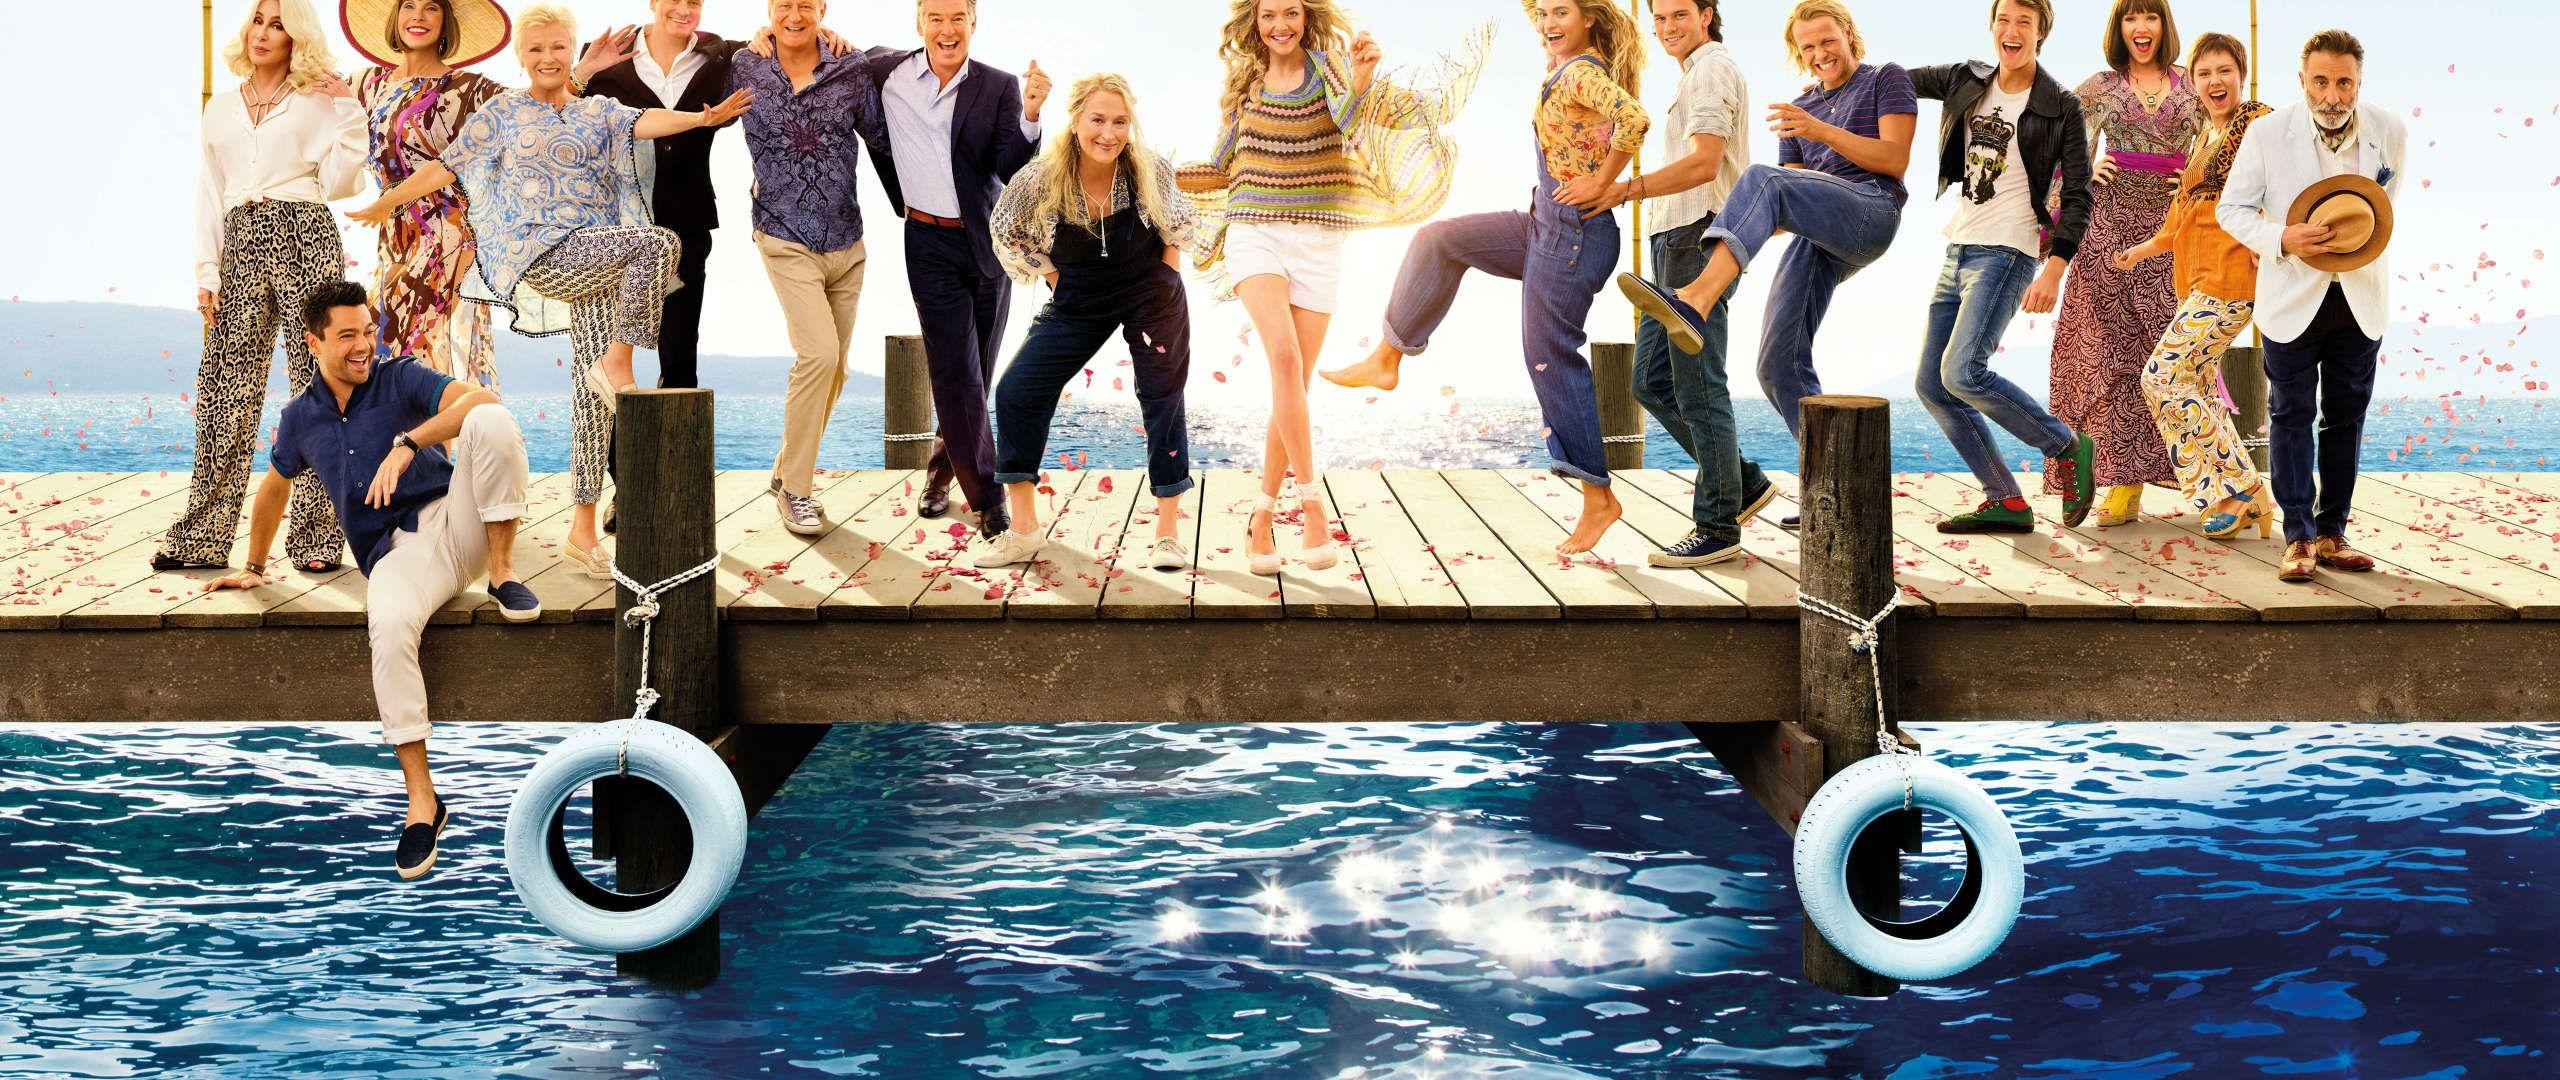 Download Mamma Mia Here We Go Again First Poster 720x1280 Resolution